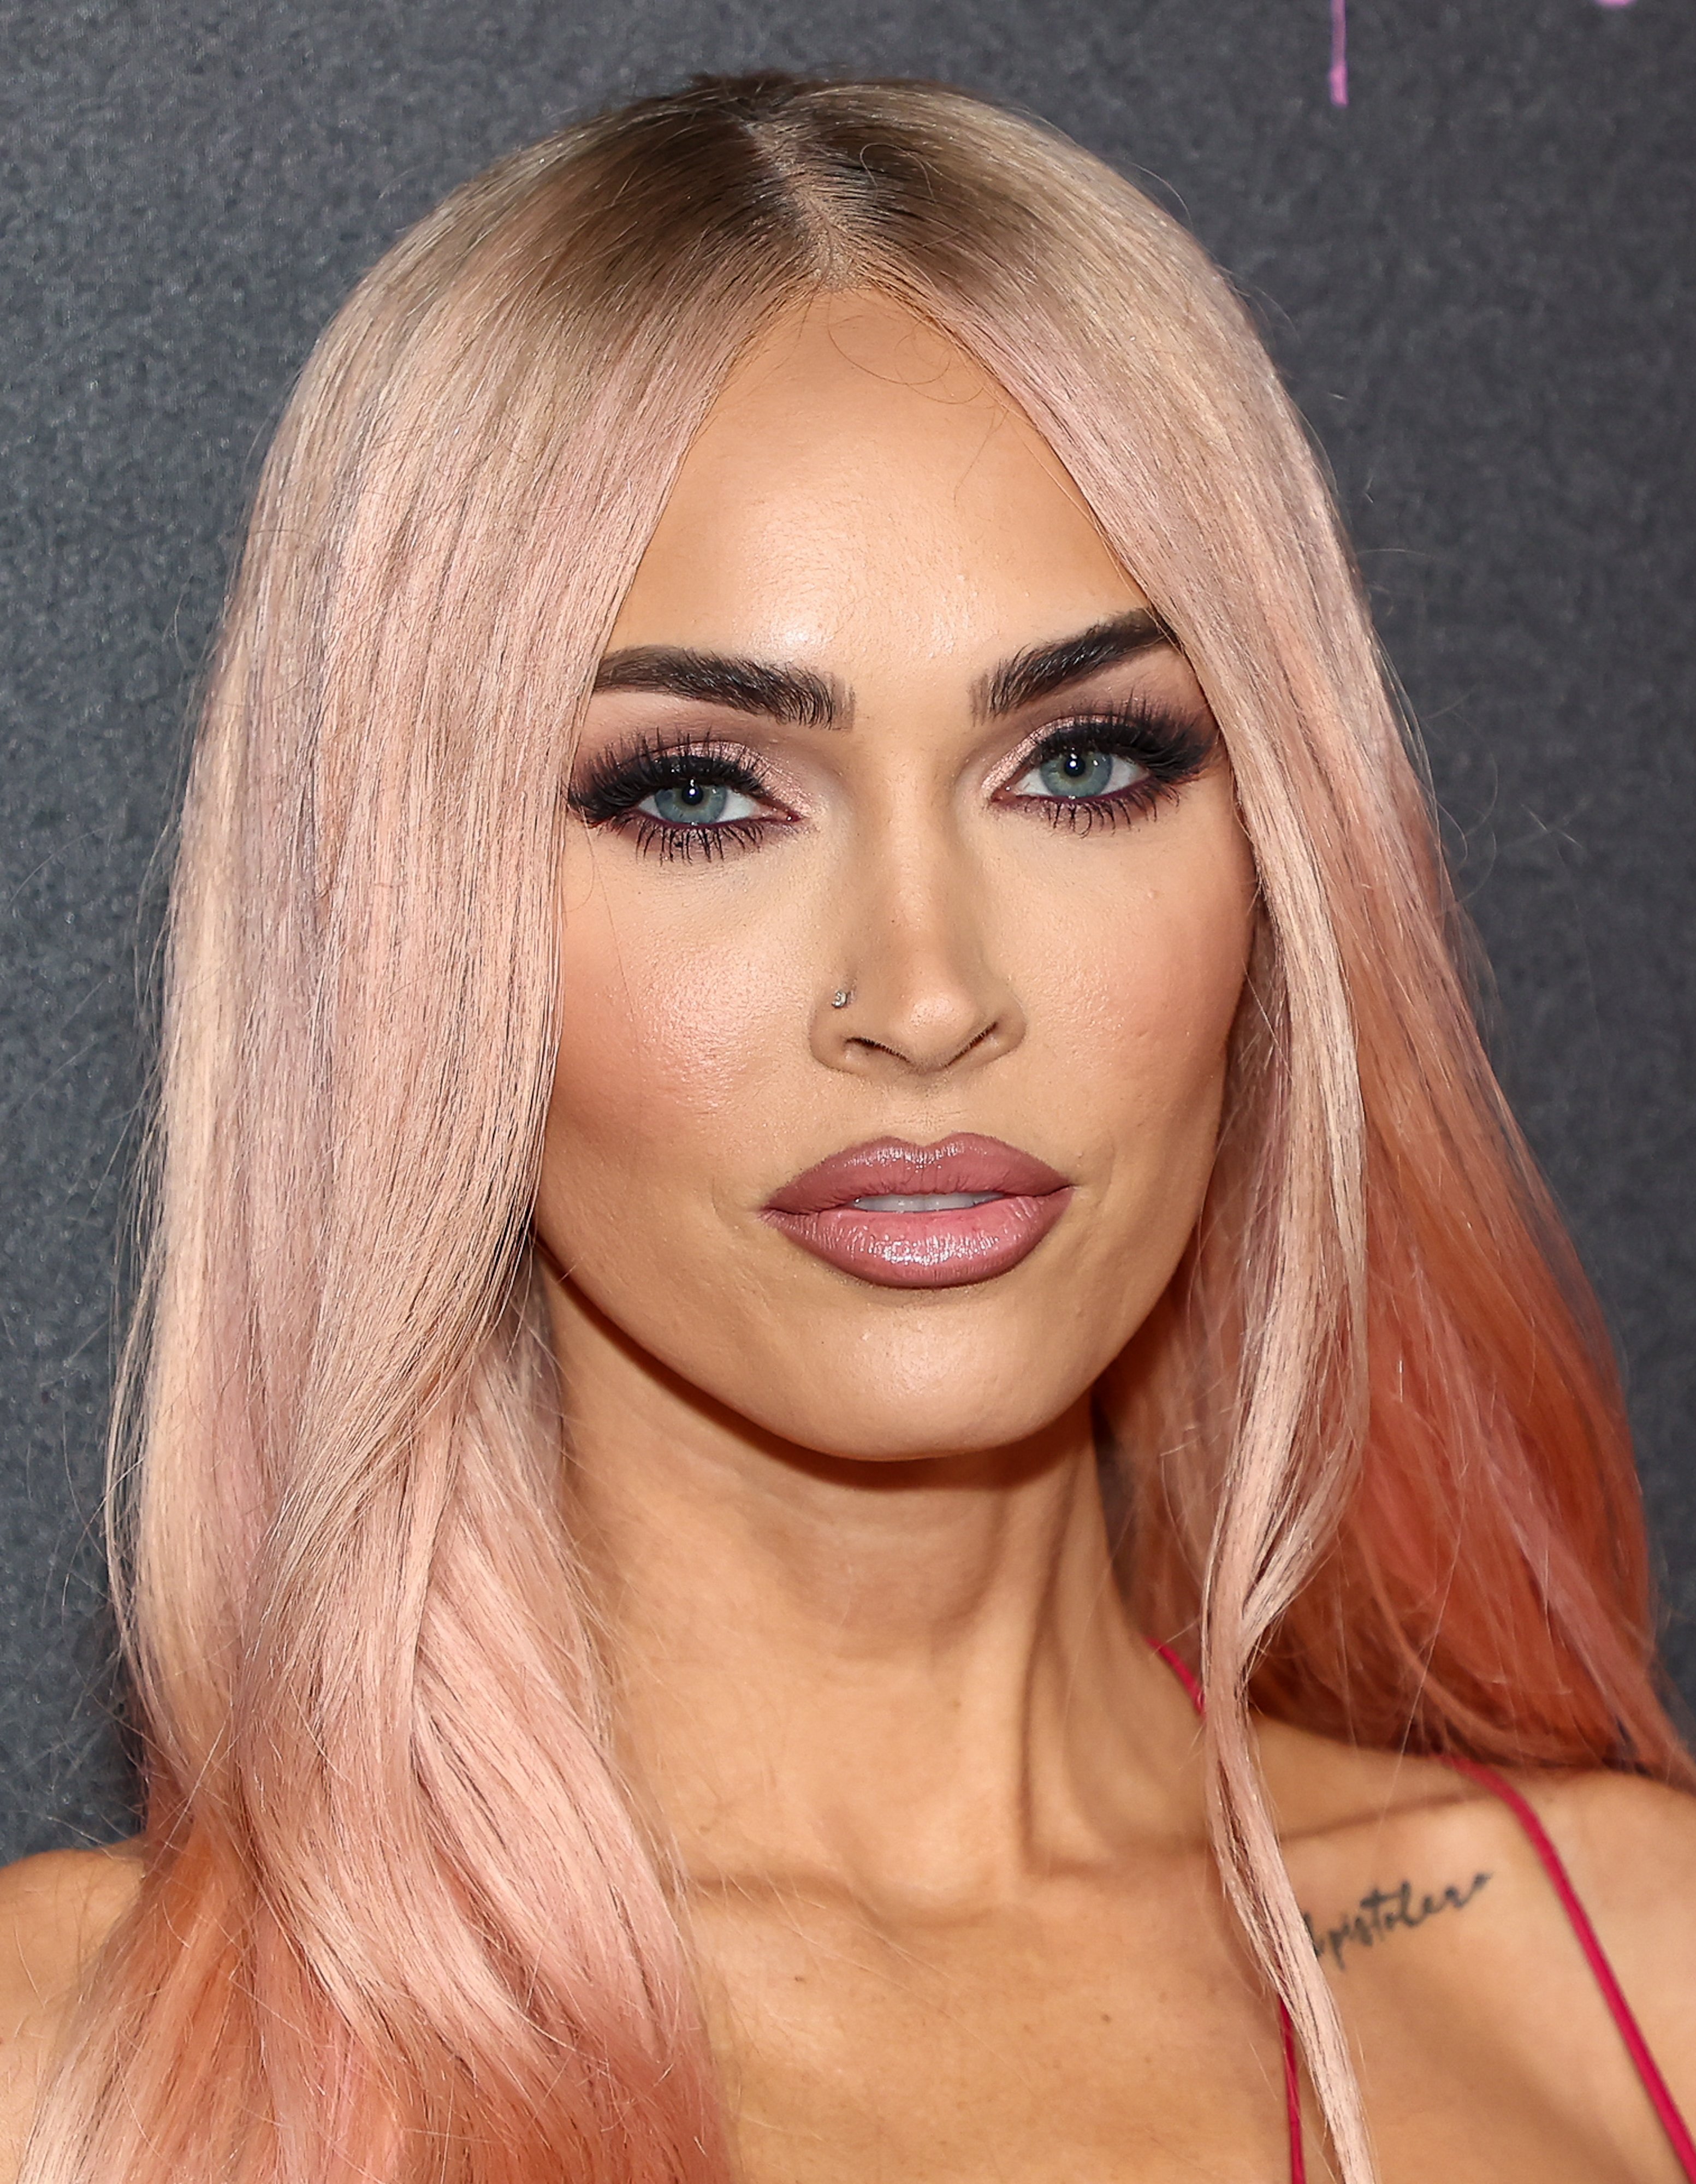 Megan Fox at the premiere of "Machine Gun Kelly's Life In Pink" on June 27, 2022 | Source: Getty Images